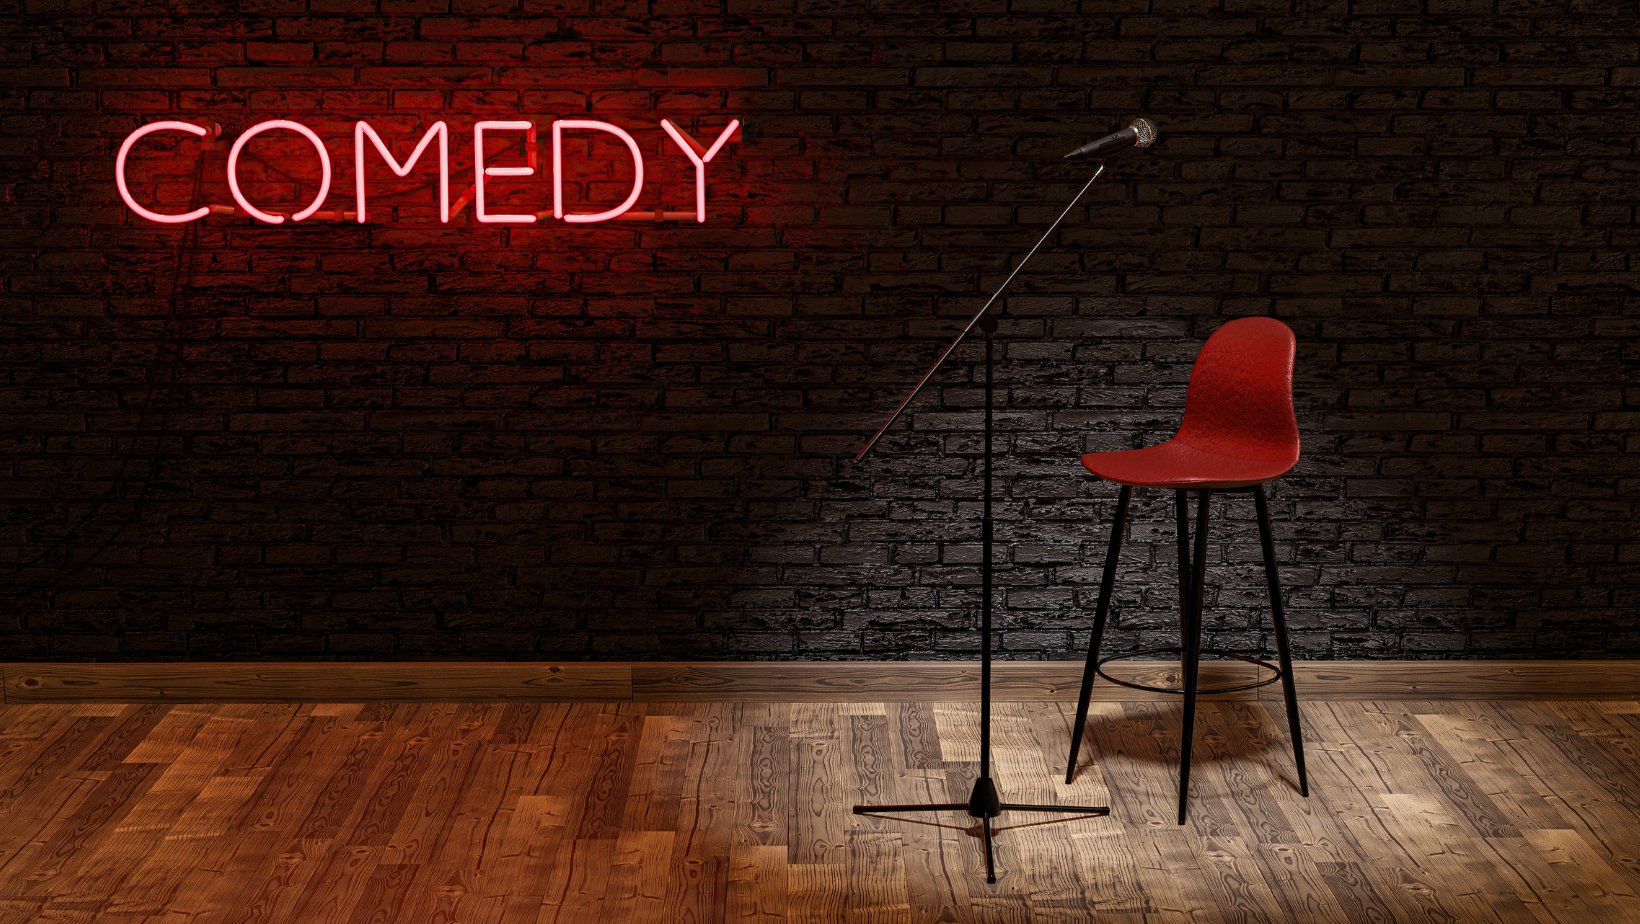 A dark stage with a red chair and a sign that reads "Comedy"